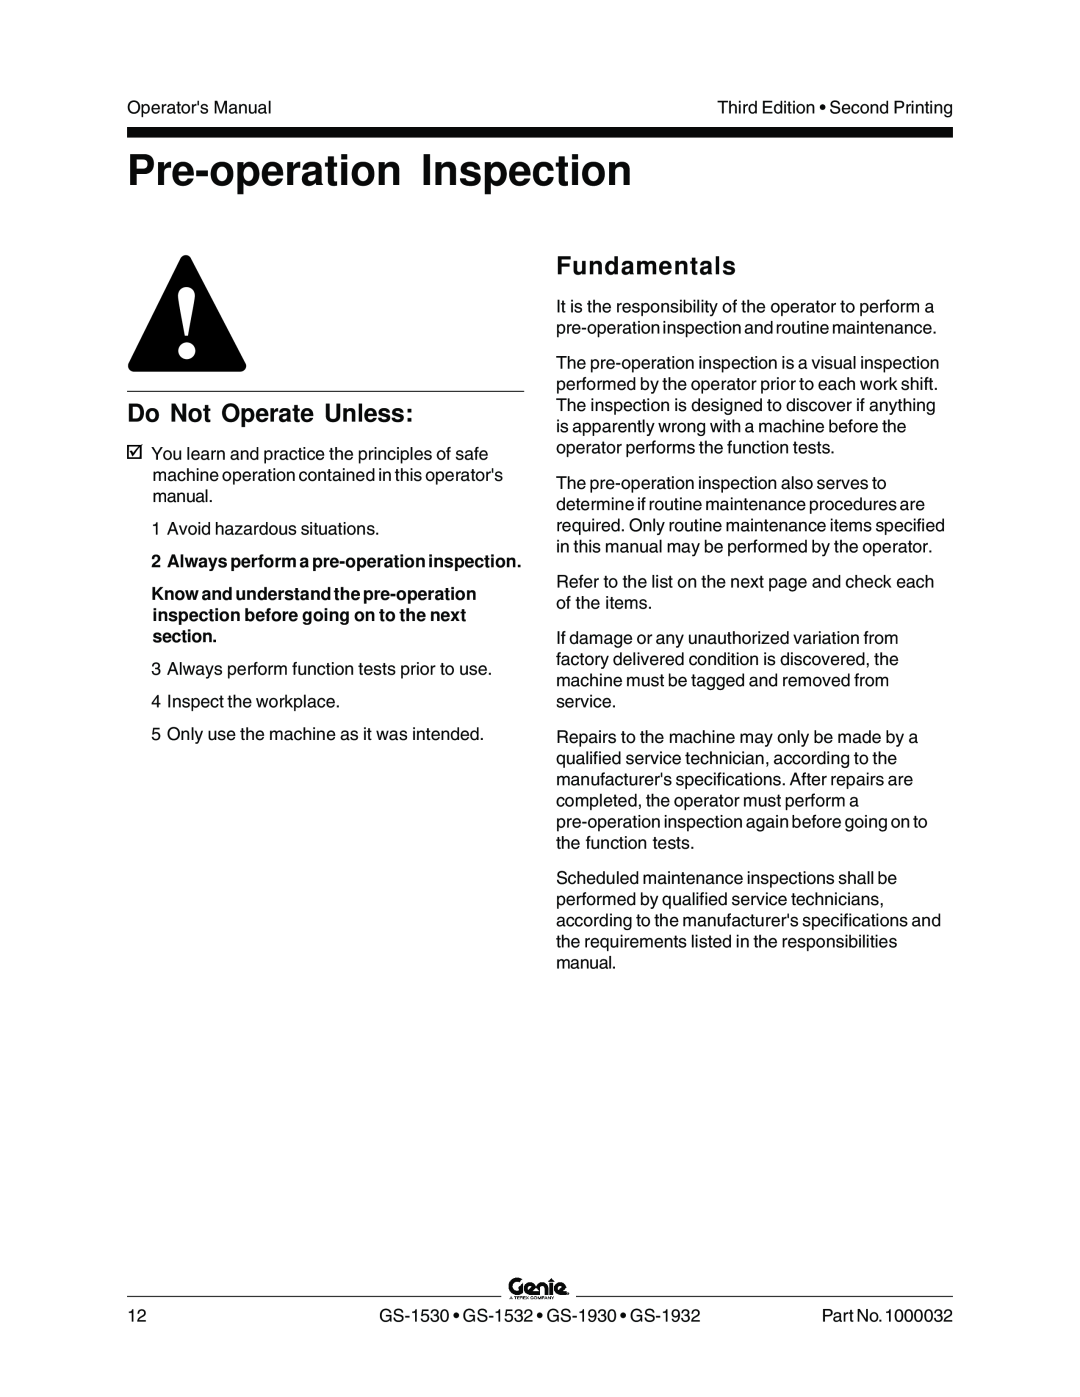 Genie GS-1932, CE Pre-operationInspection, Fundamentals, 2Always perform a pre-operationinspection, Do Not Operate Unless 